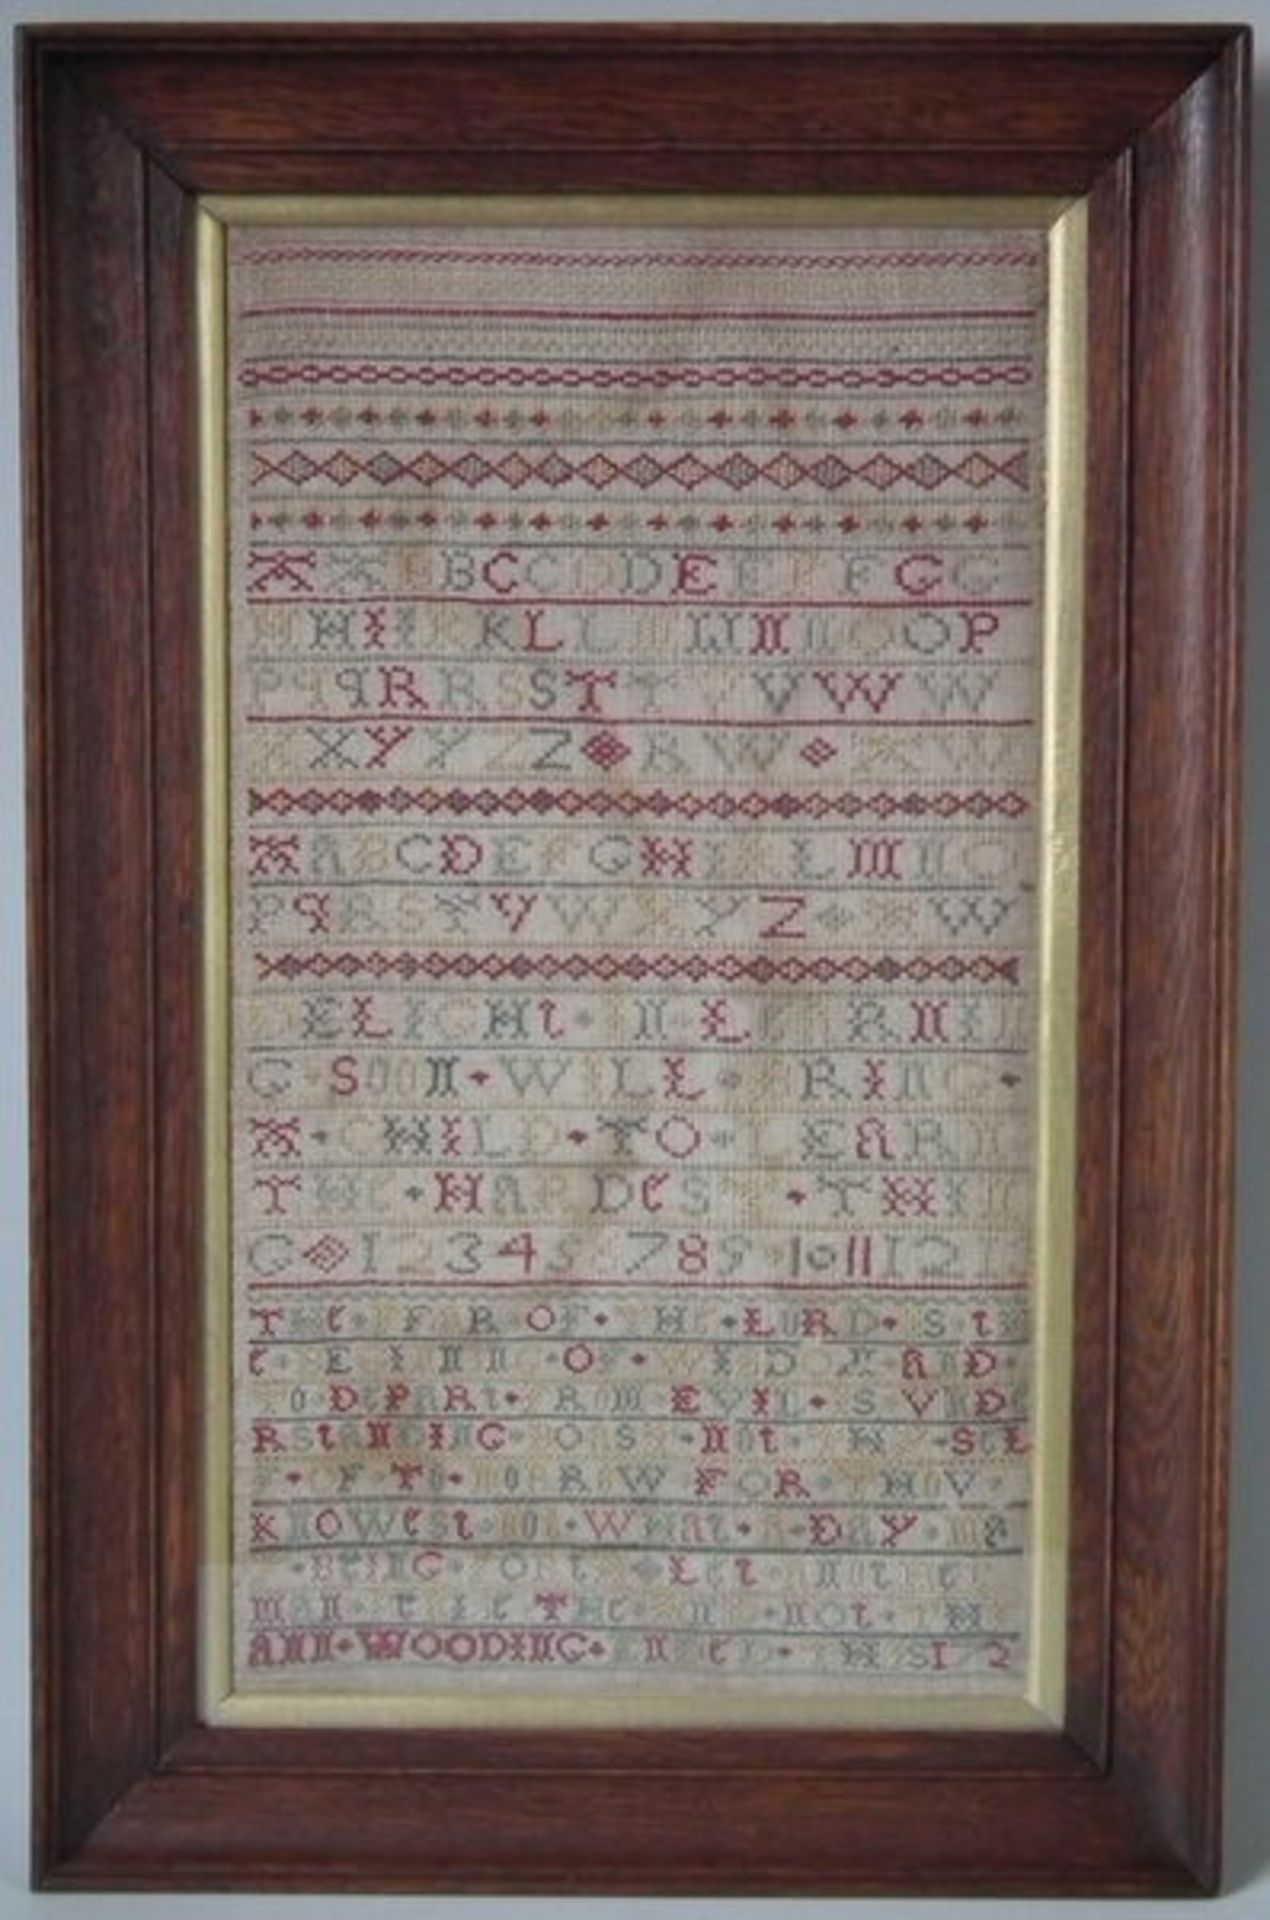 Needlework Band Sampler dated 1724 by Ann Wooding - FREE UK DELIVERY